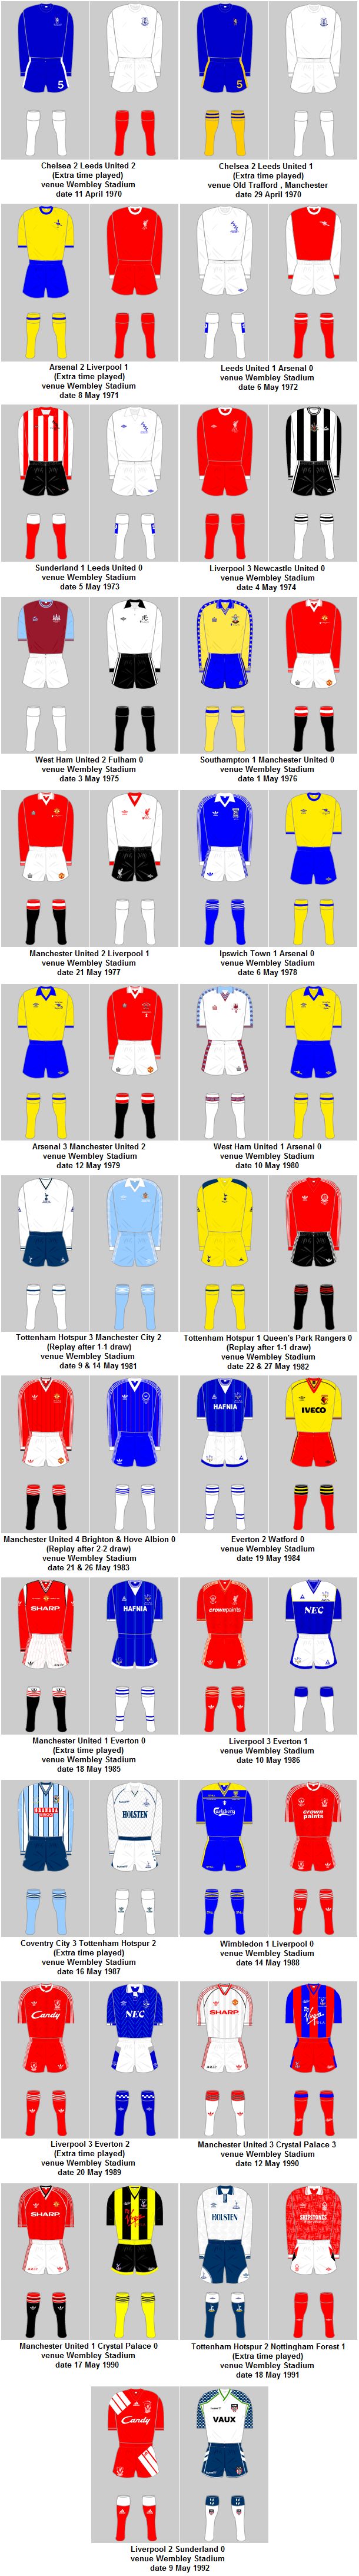 FA Cup Final Playing Kits 1969-70 to 1991-92